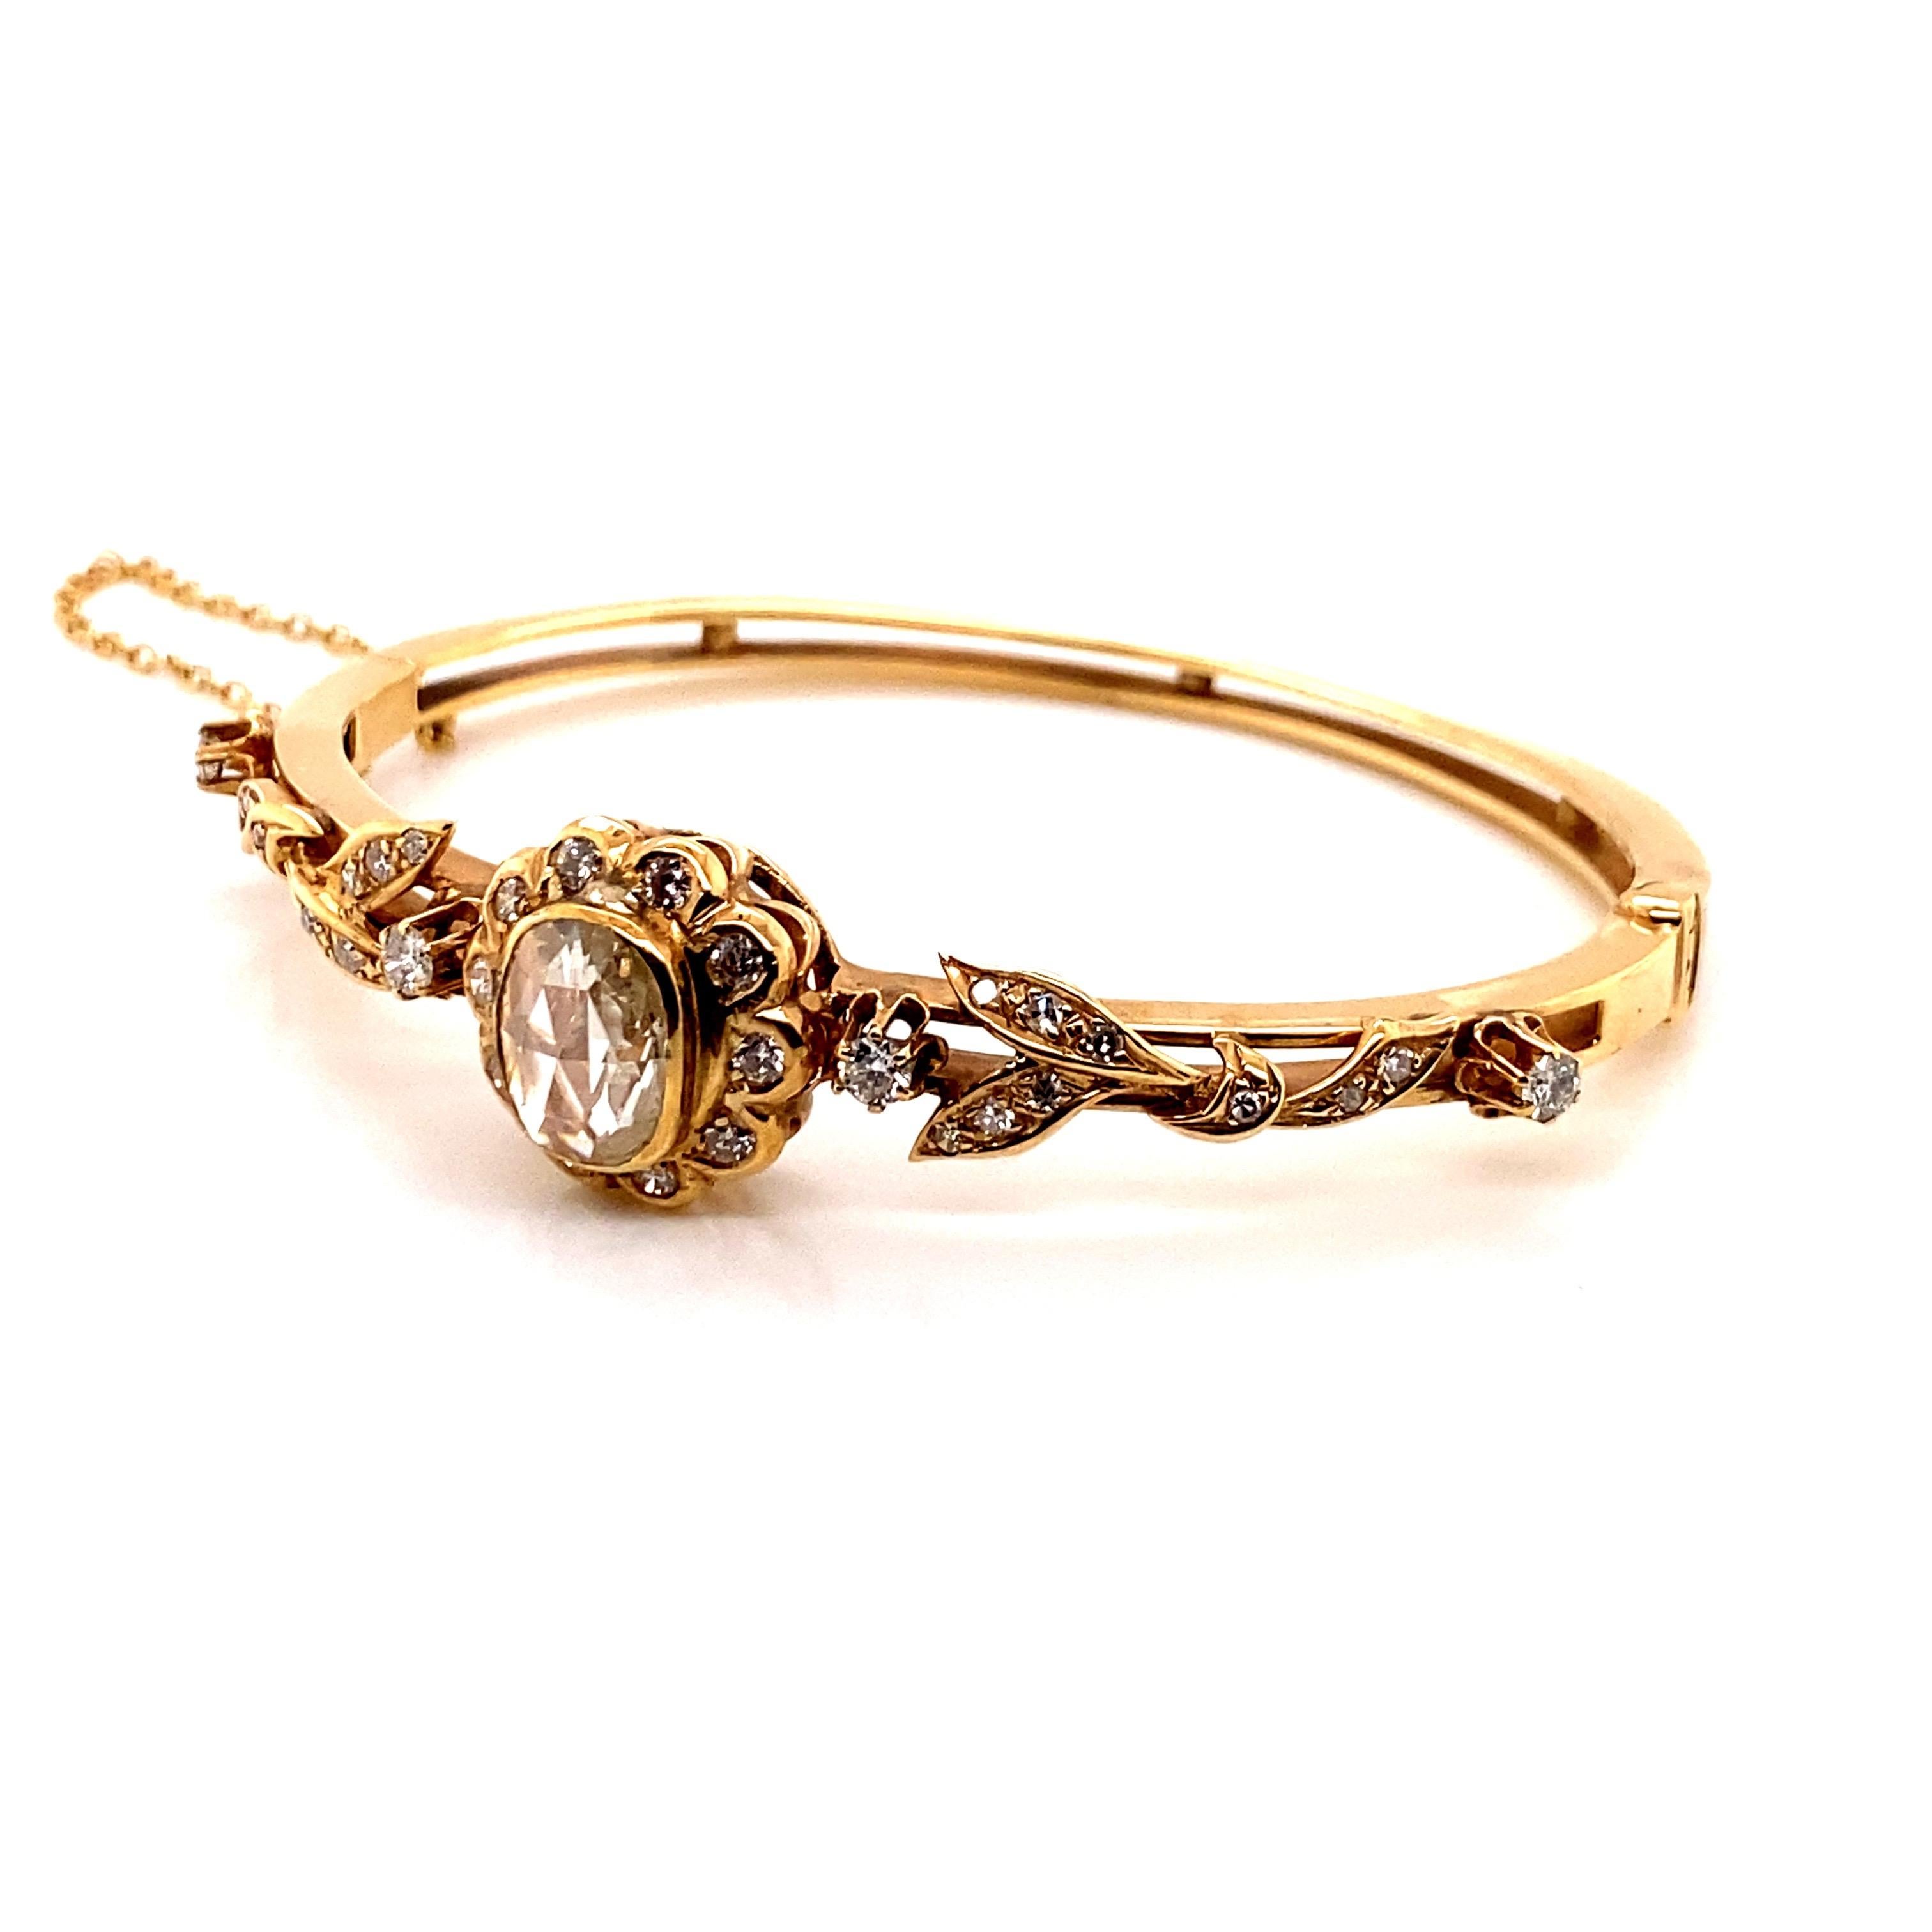 Vintage 14K Yellow Gold Victorian Reproduction Rose Cut Diamond Bangle Bracelet - The bangle contains a cushion shape rose cut diamond that measures approximately 10 x 8 x 2.5mm and weighs approximately 1.20ct. The quality is J color and I1 clarity.